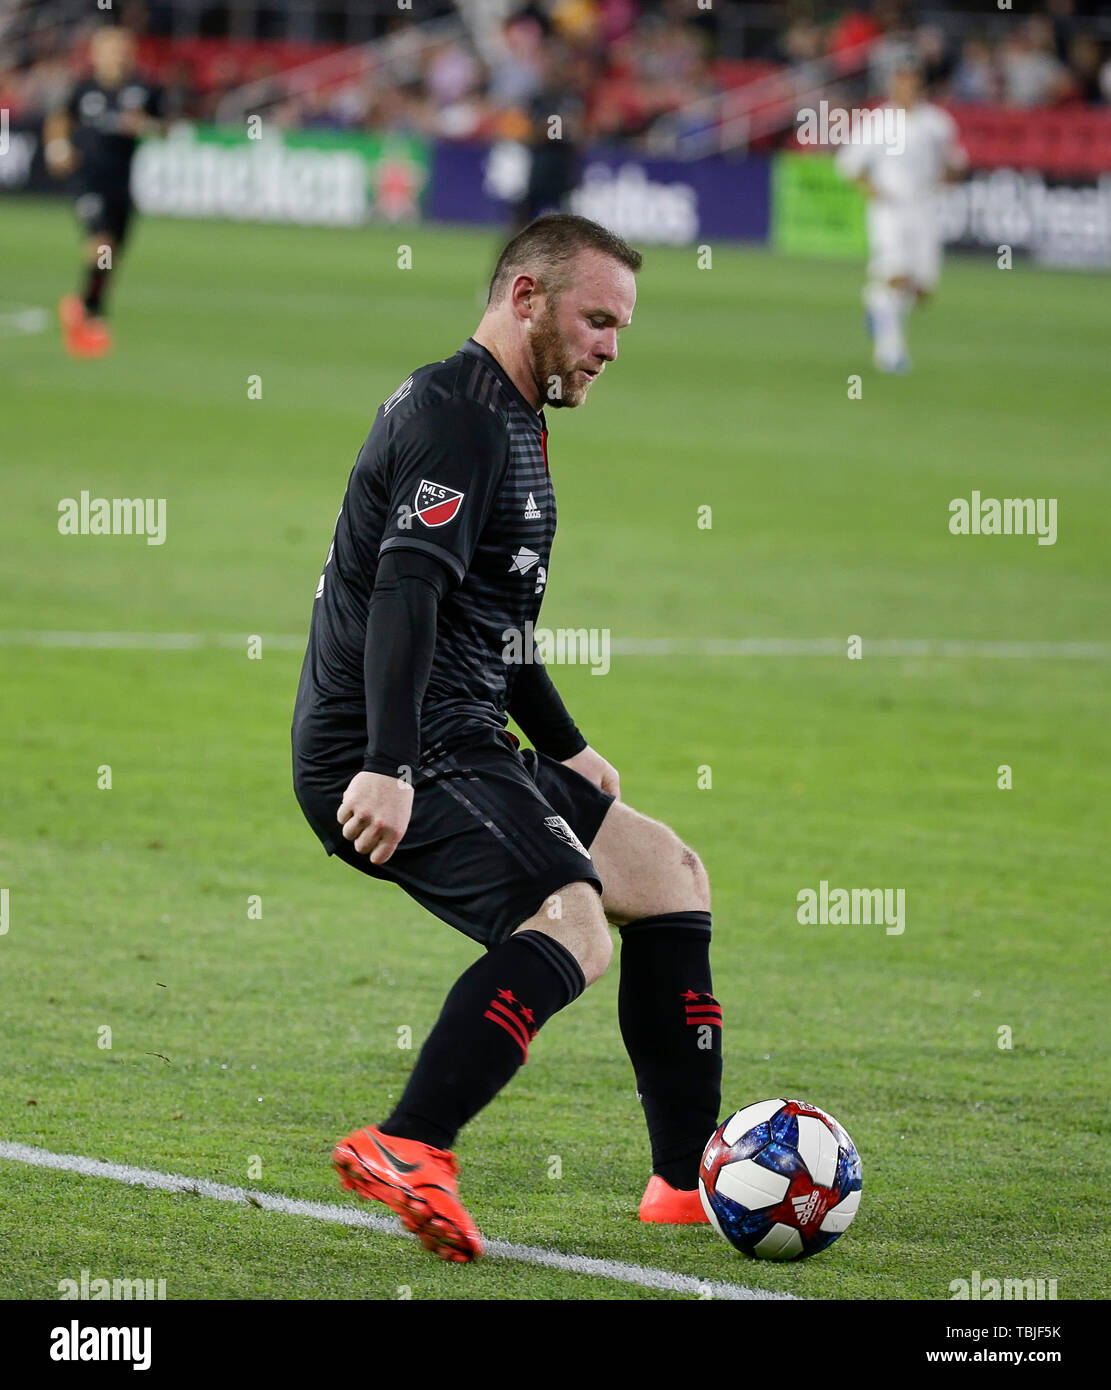 Washington DC, USA. 1st June, 2019. D.C. United Forward (9) Wayne Rooney controls the ball during an MLS soccer match between the D.C. United and the San Jose Earthquakes at Audi Field in Washington DC. Justin Cooper/CSM/Alamy Live News Stock Photo